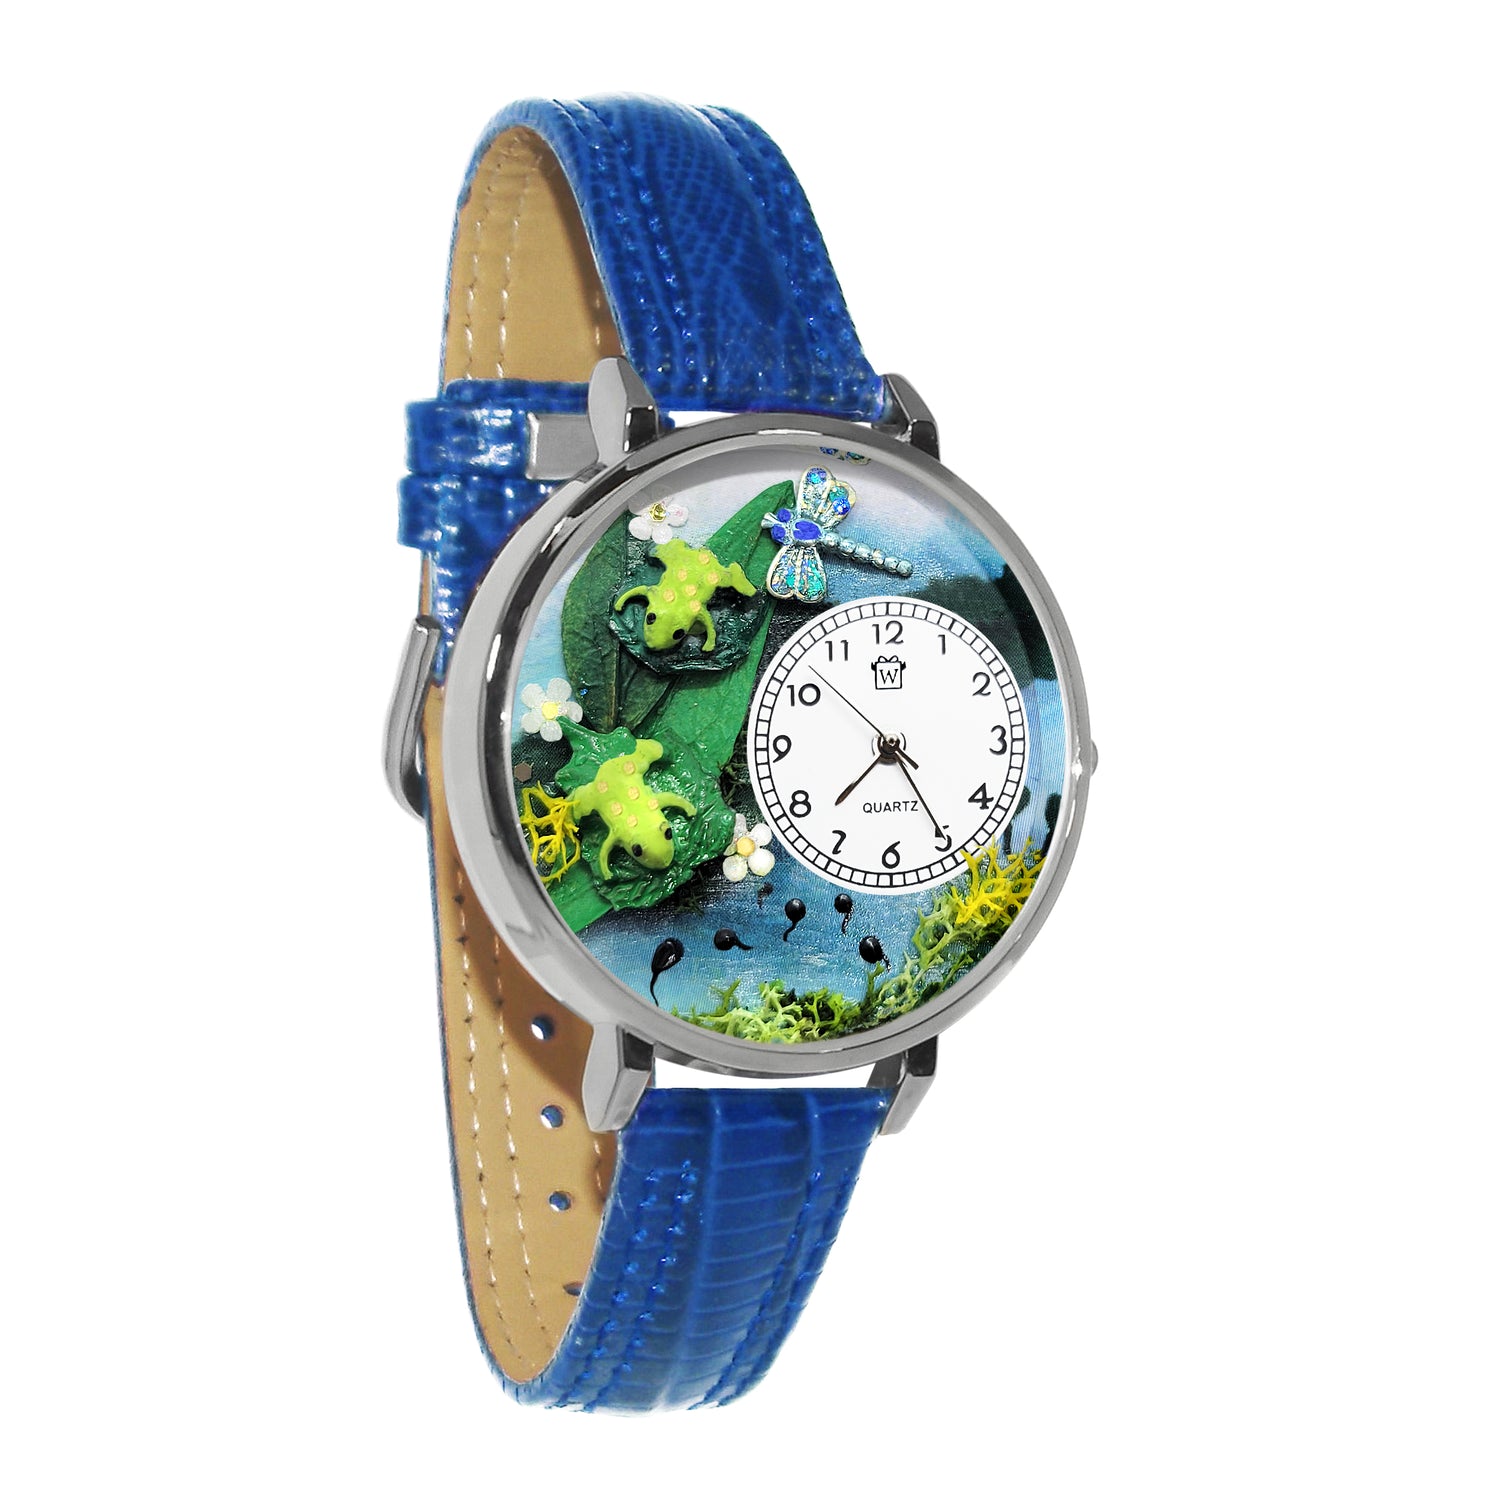 Whimsical Gifts | Frogs 3D Watch Large Style | Handmade in USA | Animal Lover | Outdoor & Garden | Novelty Unique Fun Miniatures Gift | Silver Finish Royal Blue Leather Watch Band